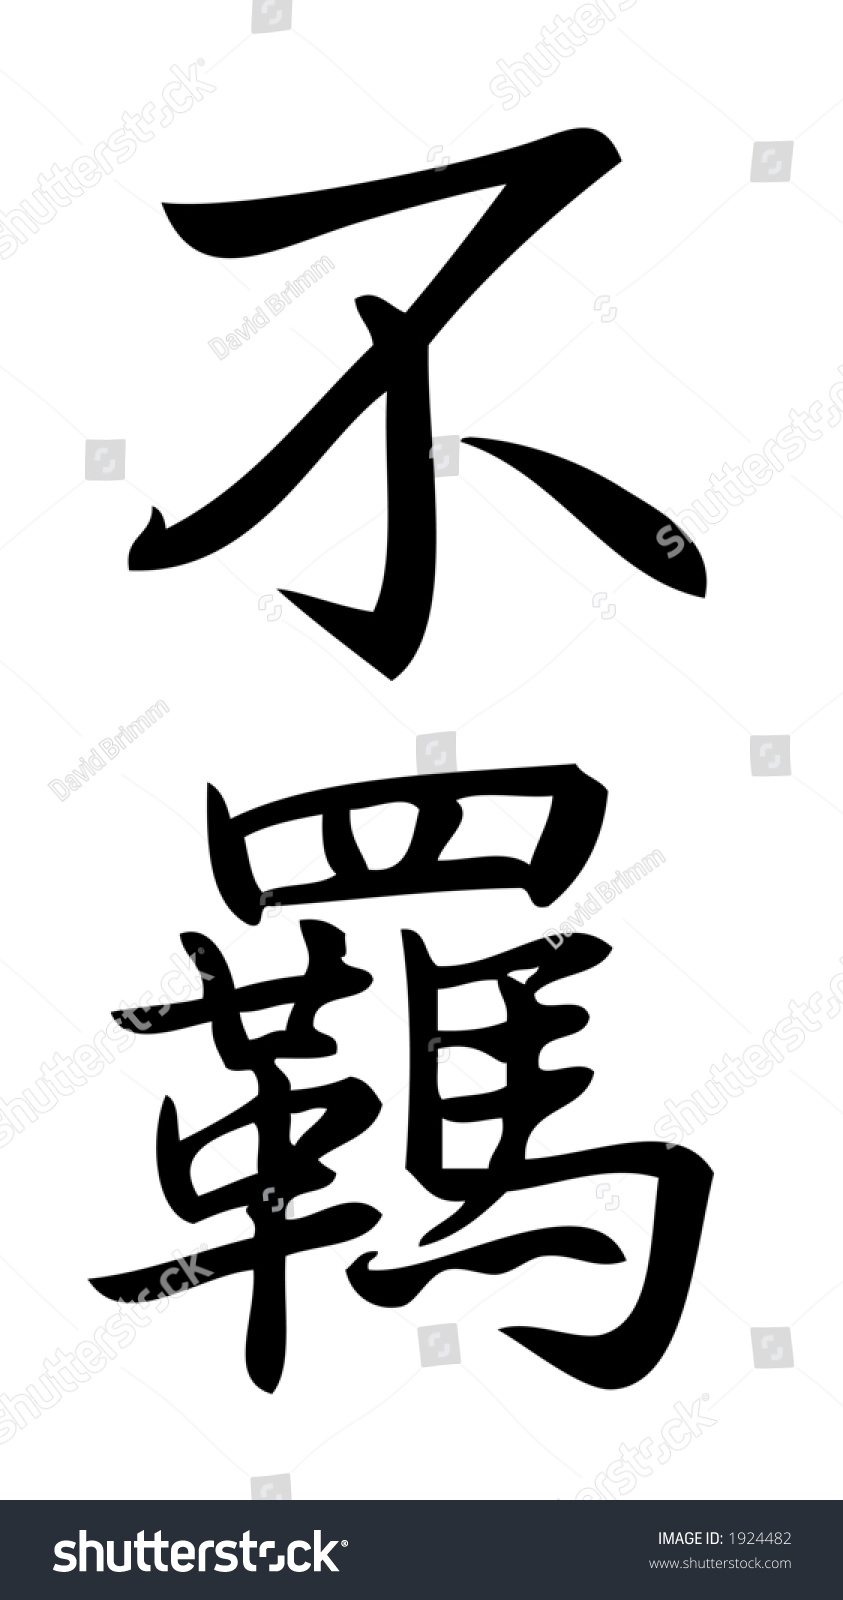 kanji-character-for-freedom-independence-kanji-are-chinese-characters-first-introduced-to